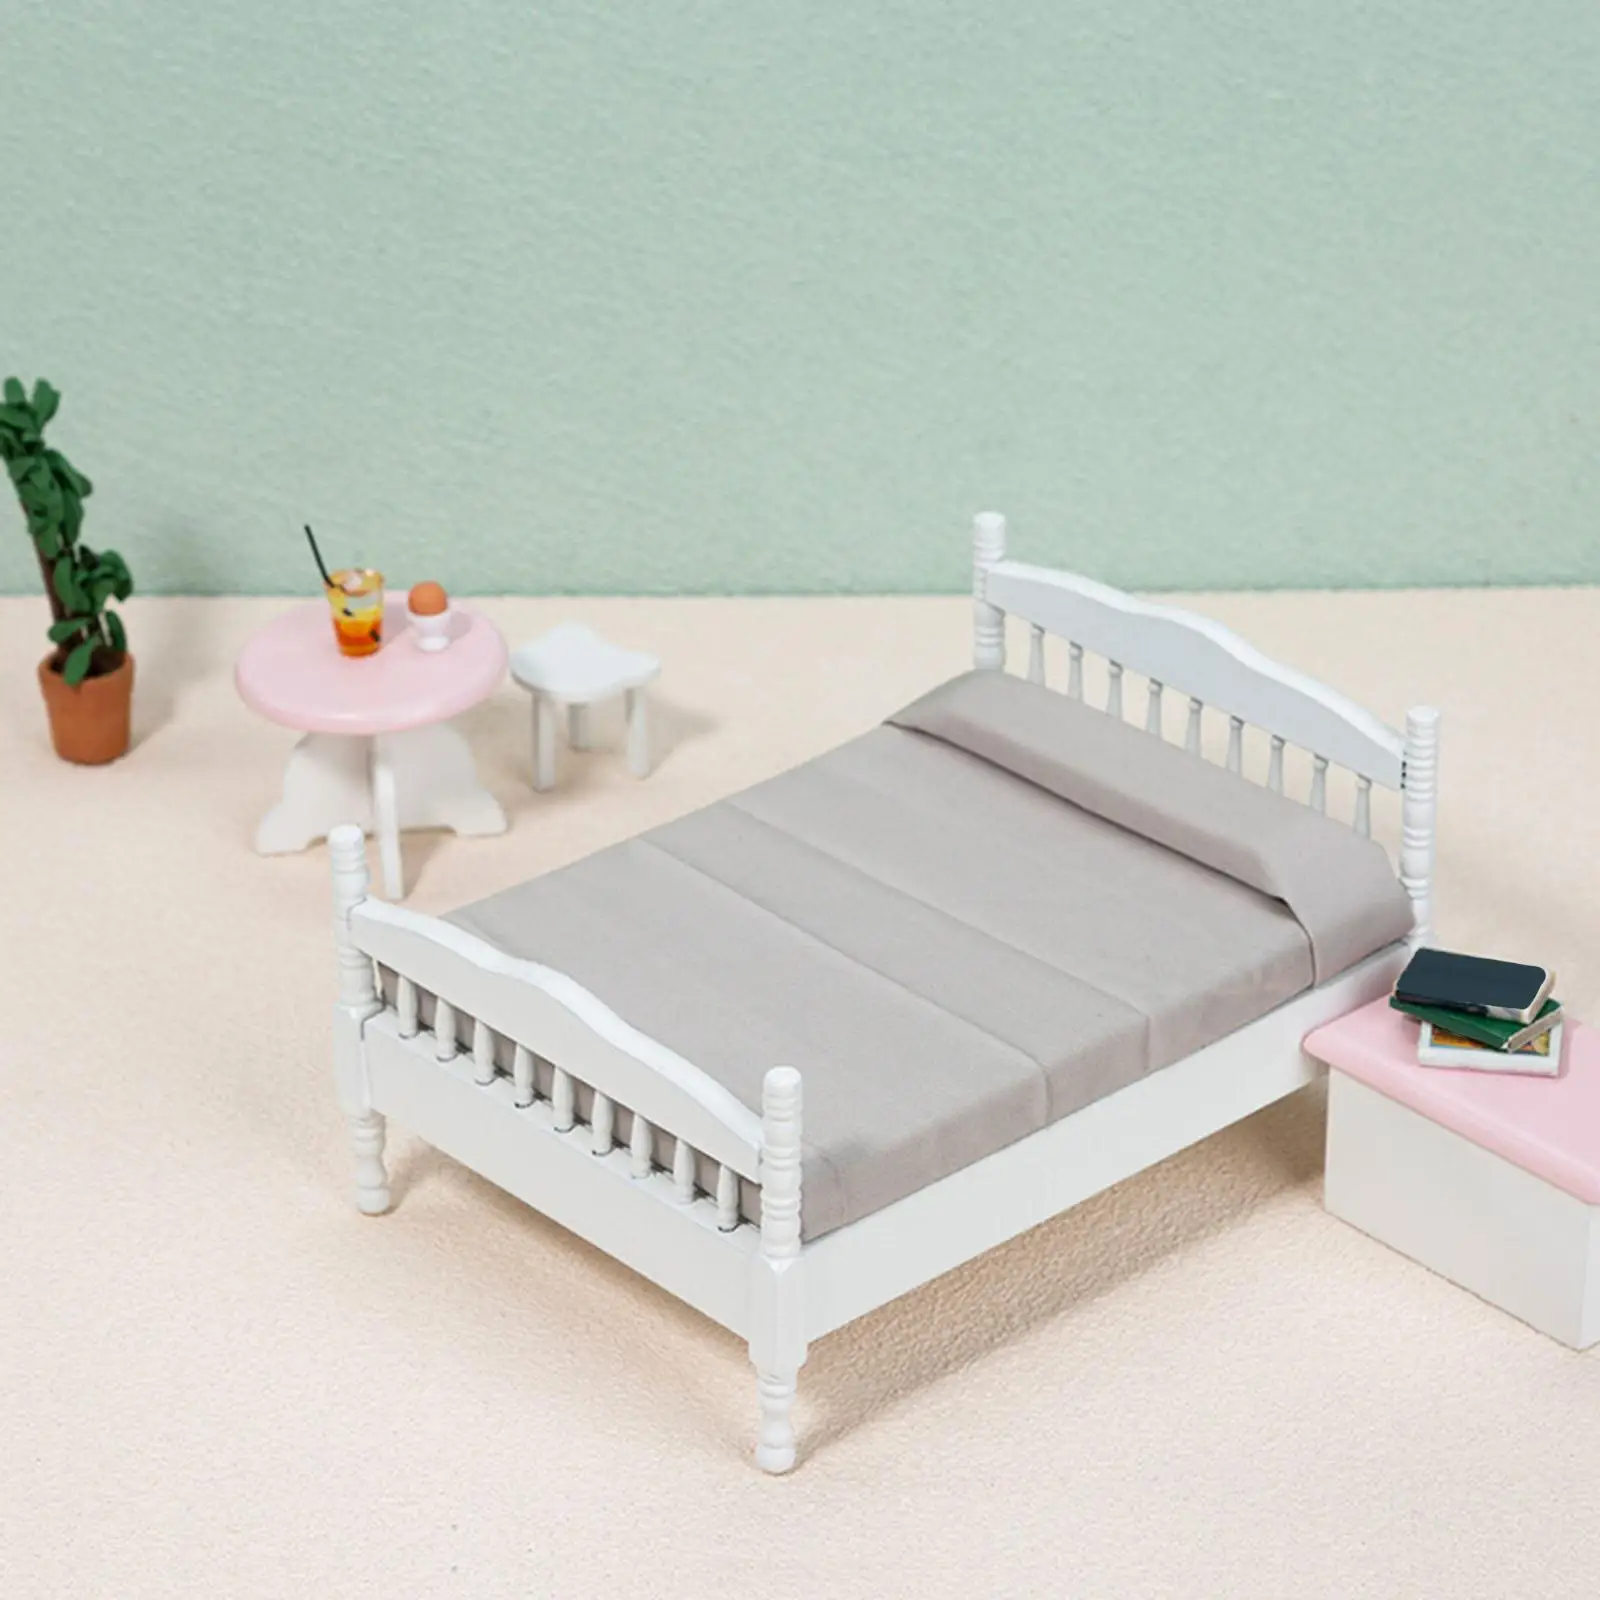 Handcrafted Dollhouse Mini Bed Doll House Furnishings Model Toys Pretend Play Toy 1/12 Wooden Double Bed for Girls Adults Gifts